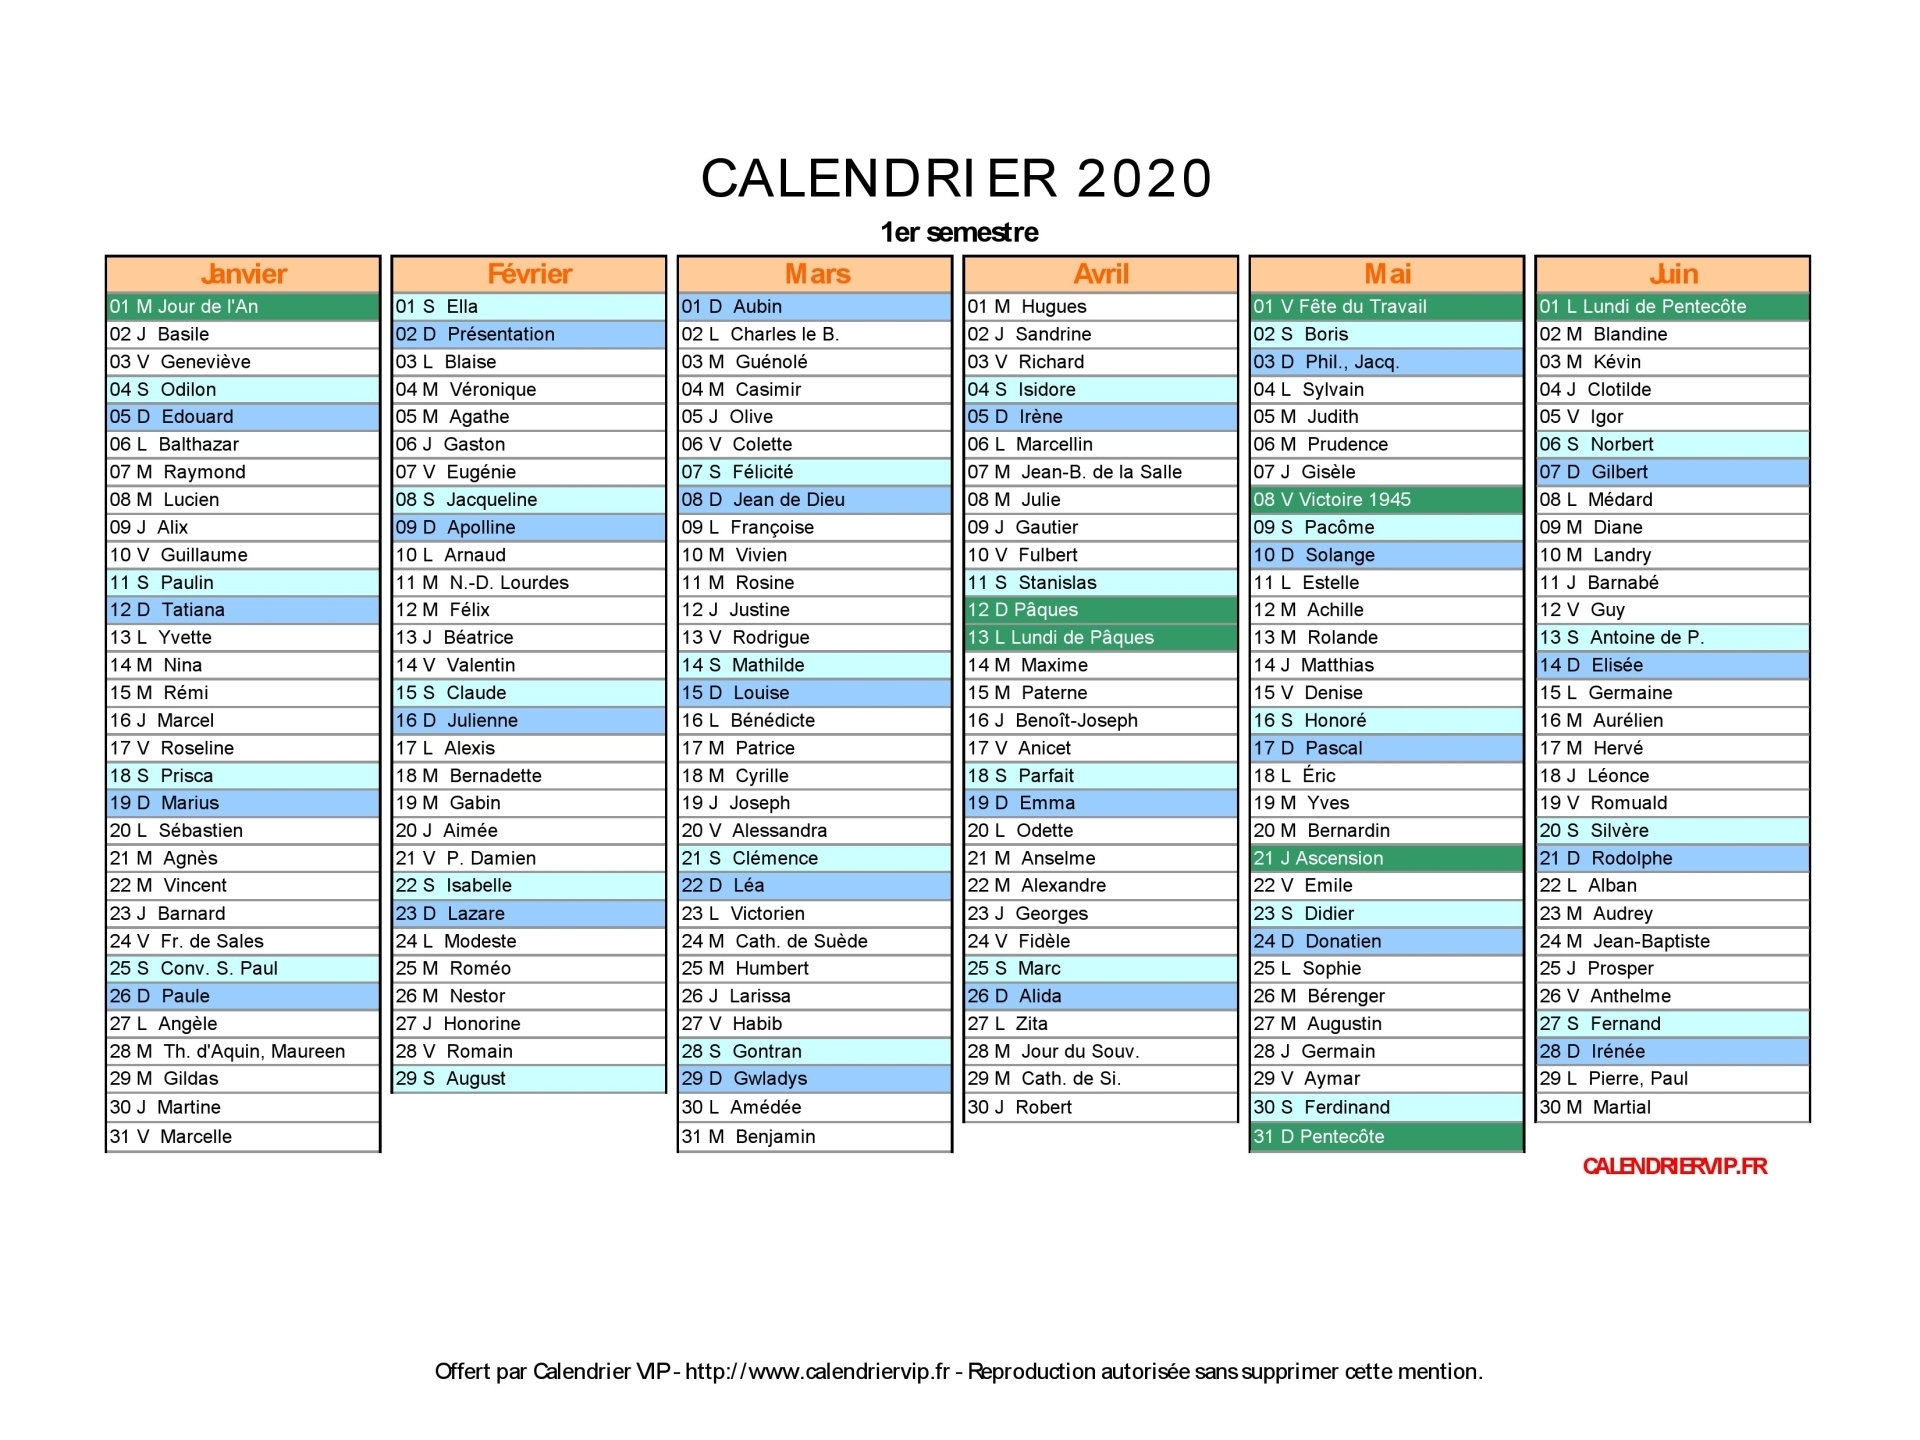 calendrier-2020-complet.jpg